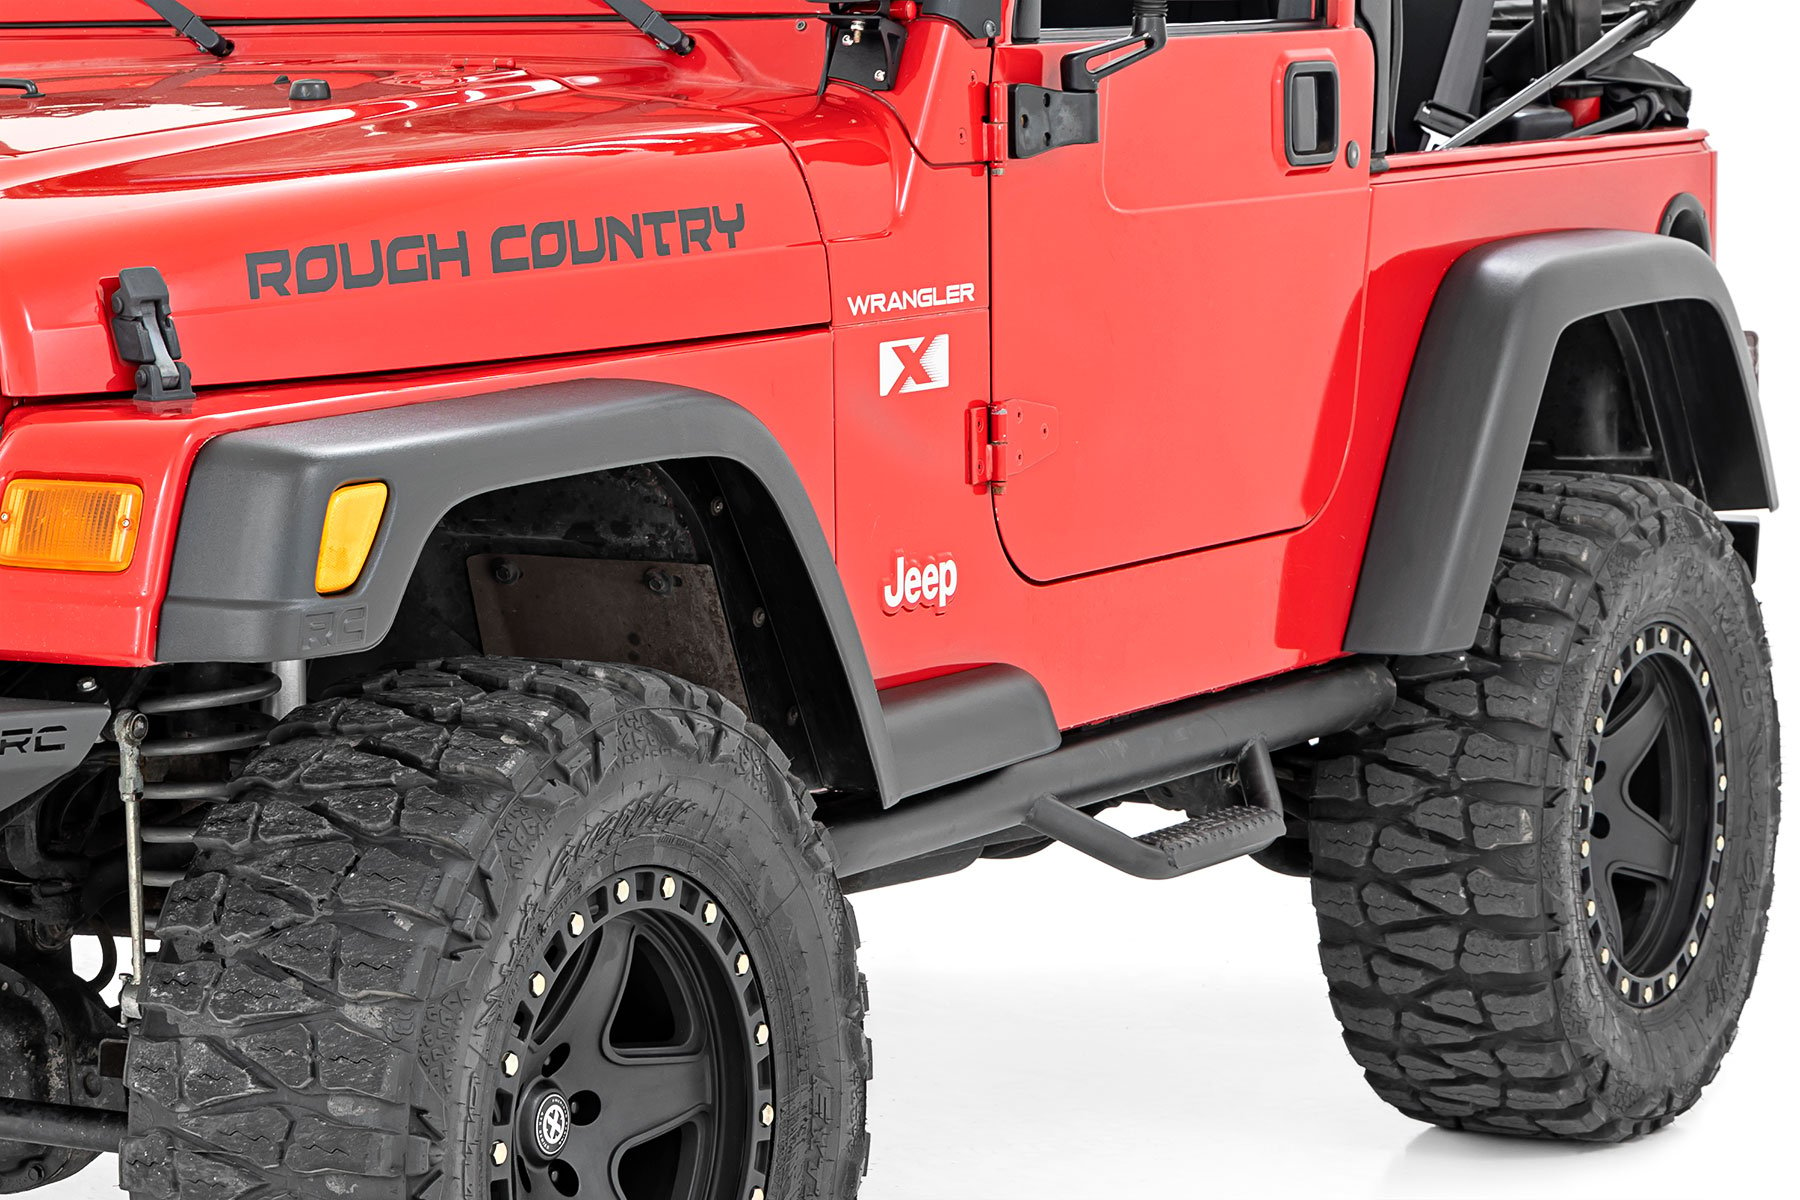 Jeep 5.50-Inch Wide Fender Flares Wrangler Rough Country 99033 TJ